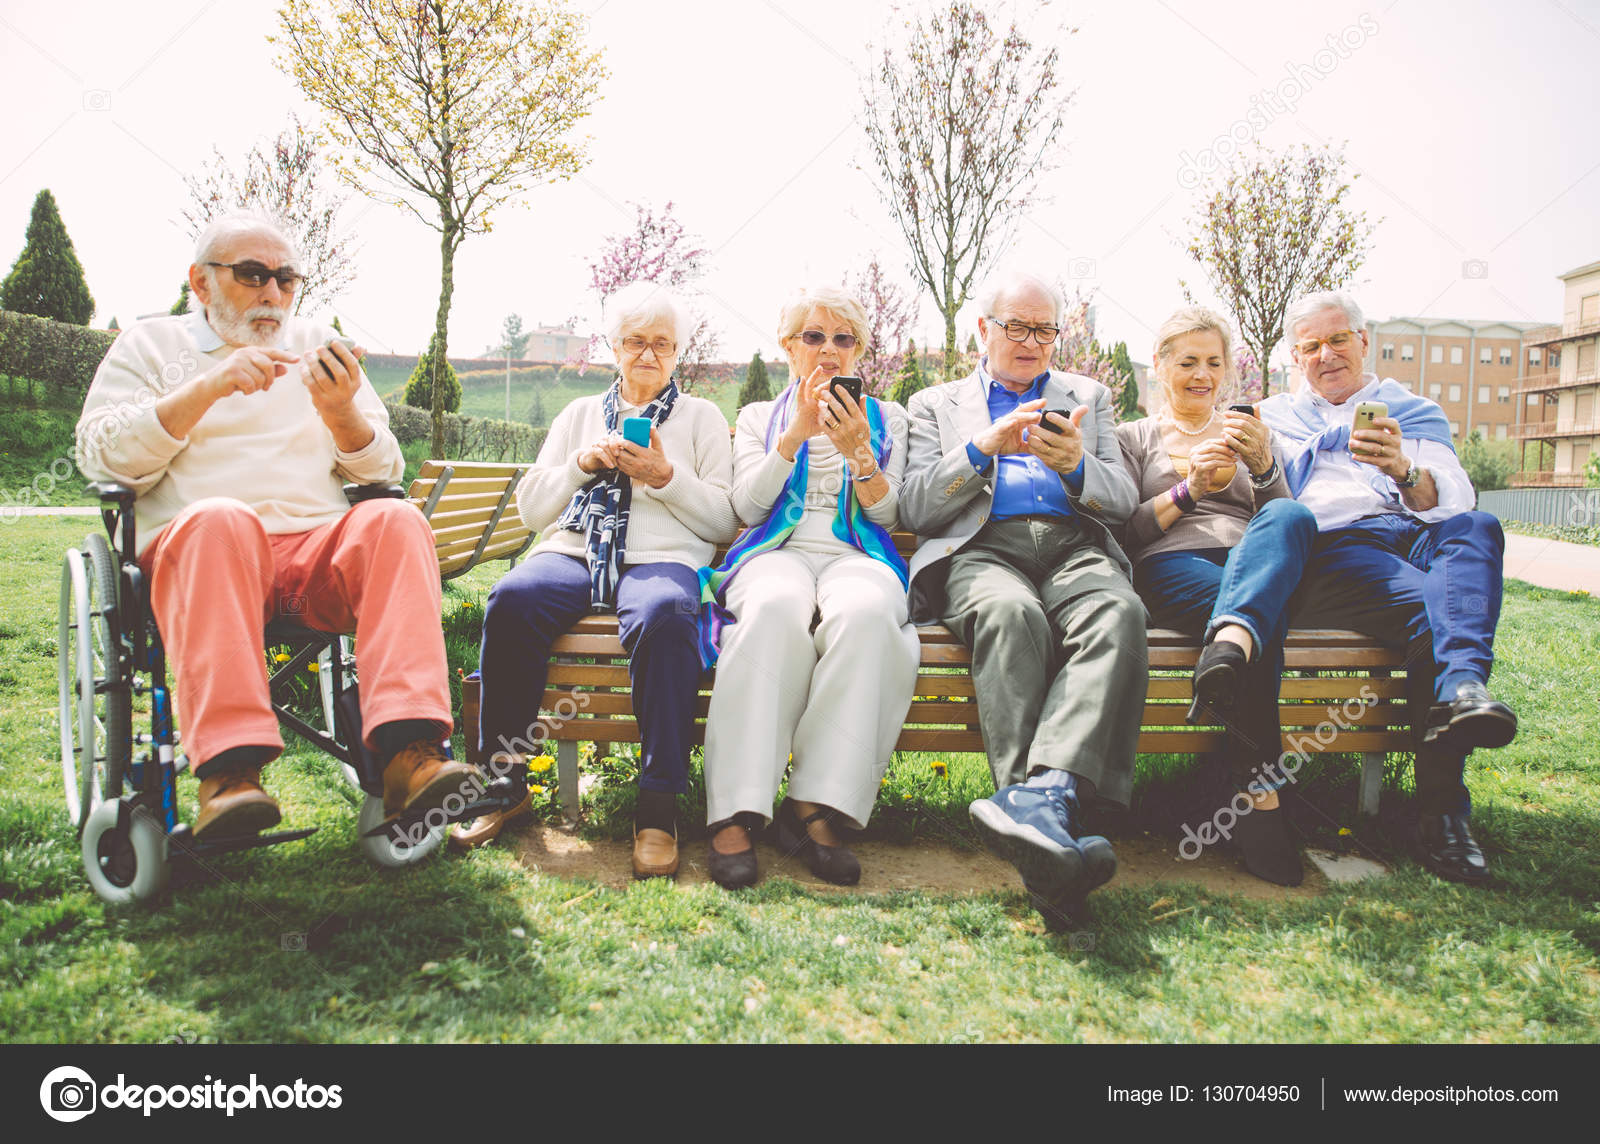 Seniors spending time at park — Stock Photo © oneinchpunch 130704950